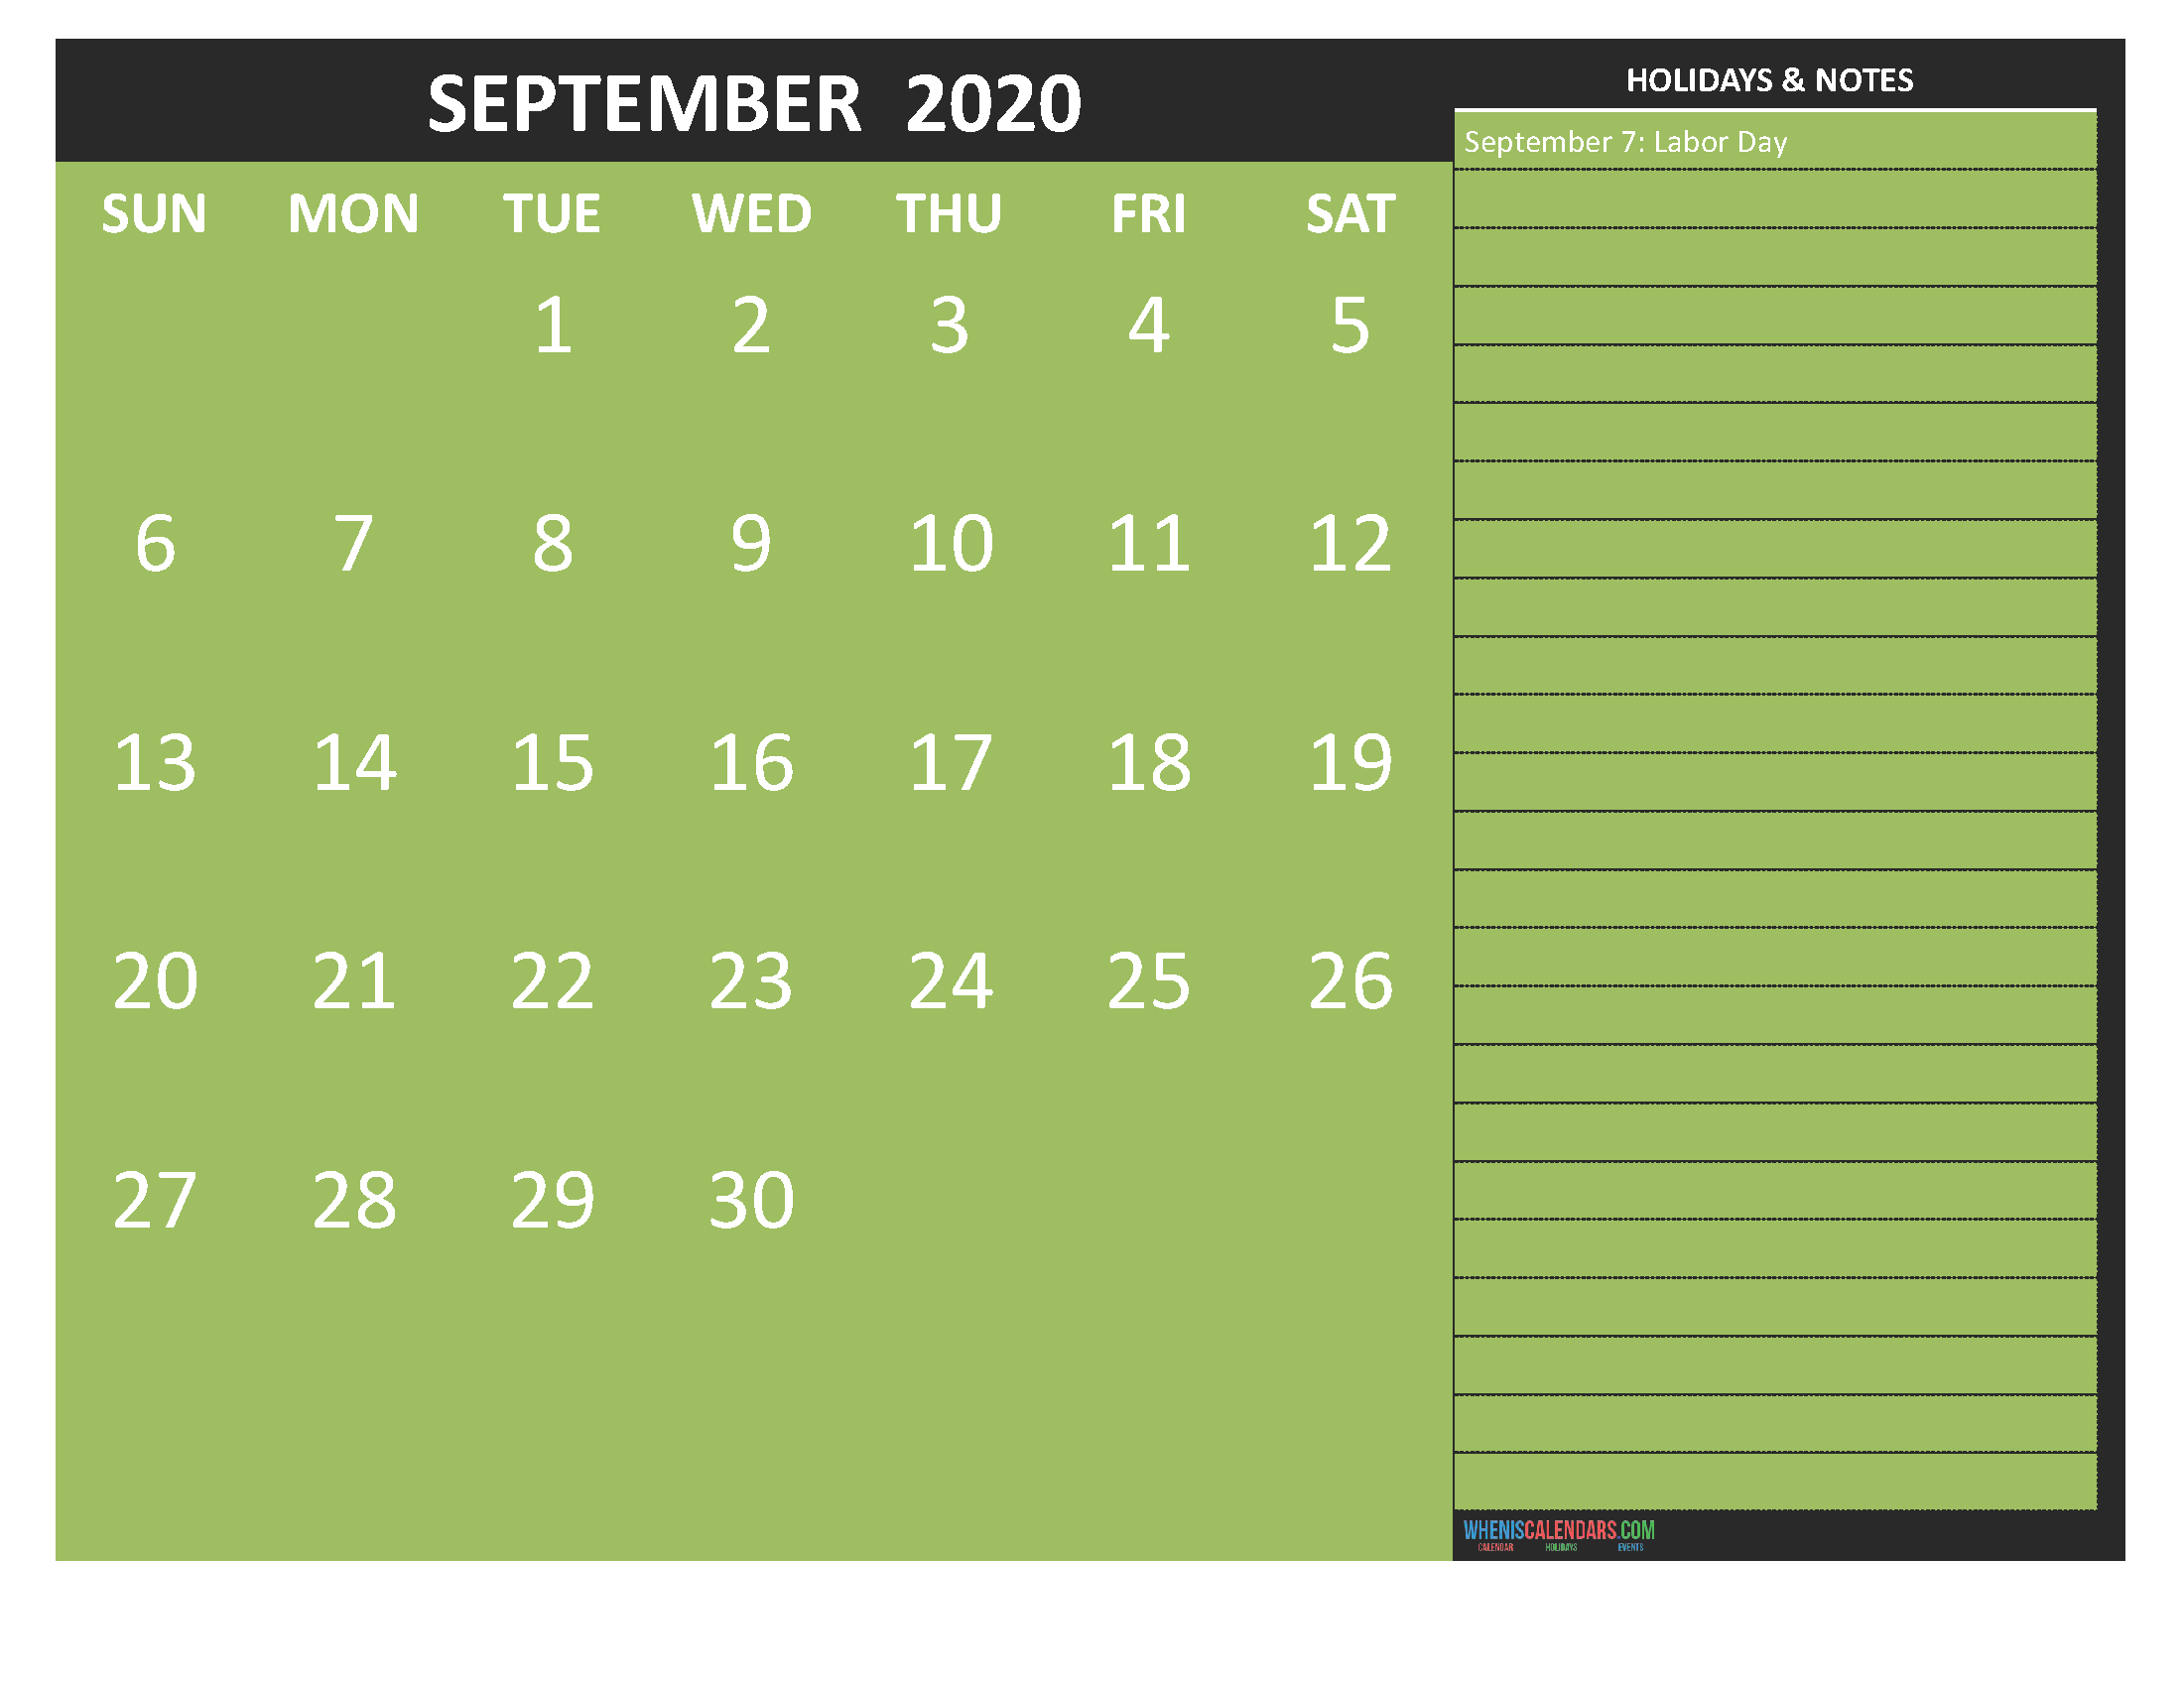 September 2020 Calendar with Holidays Free Printable by Word